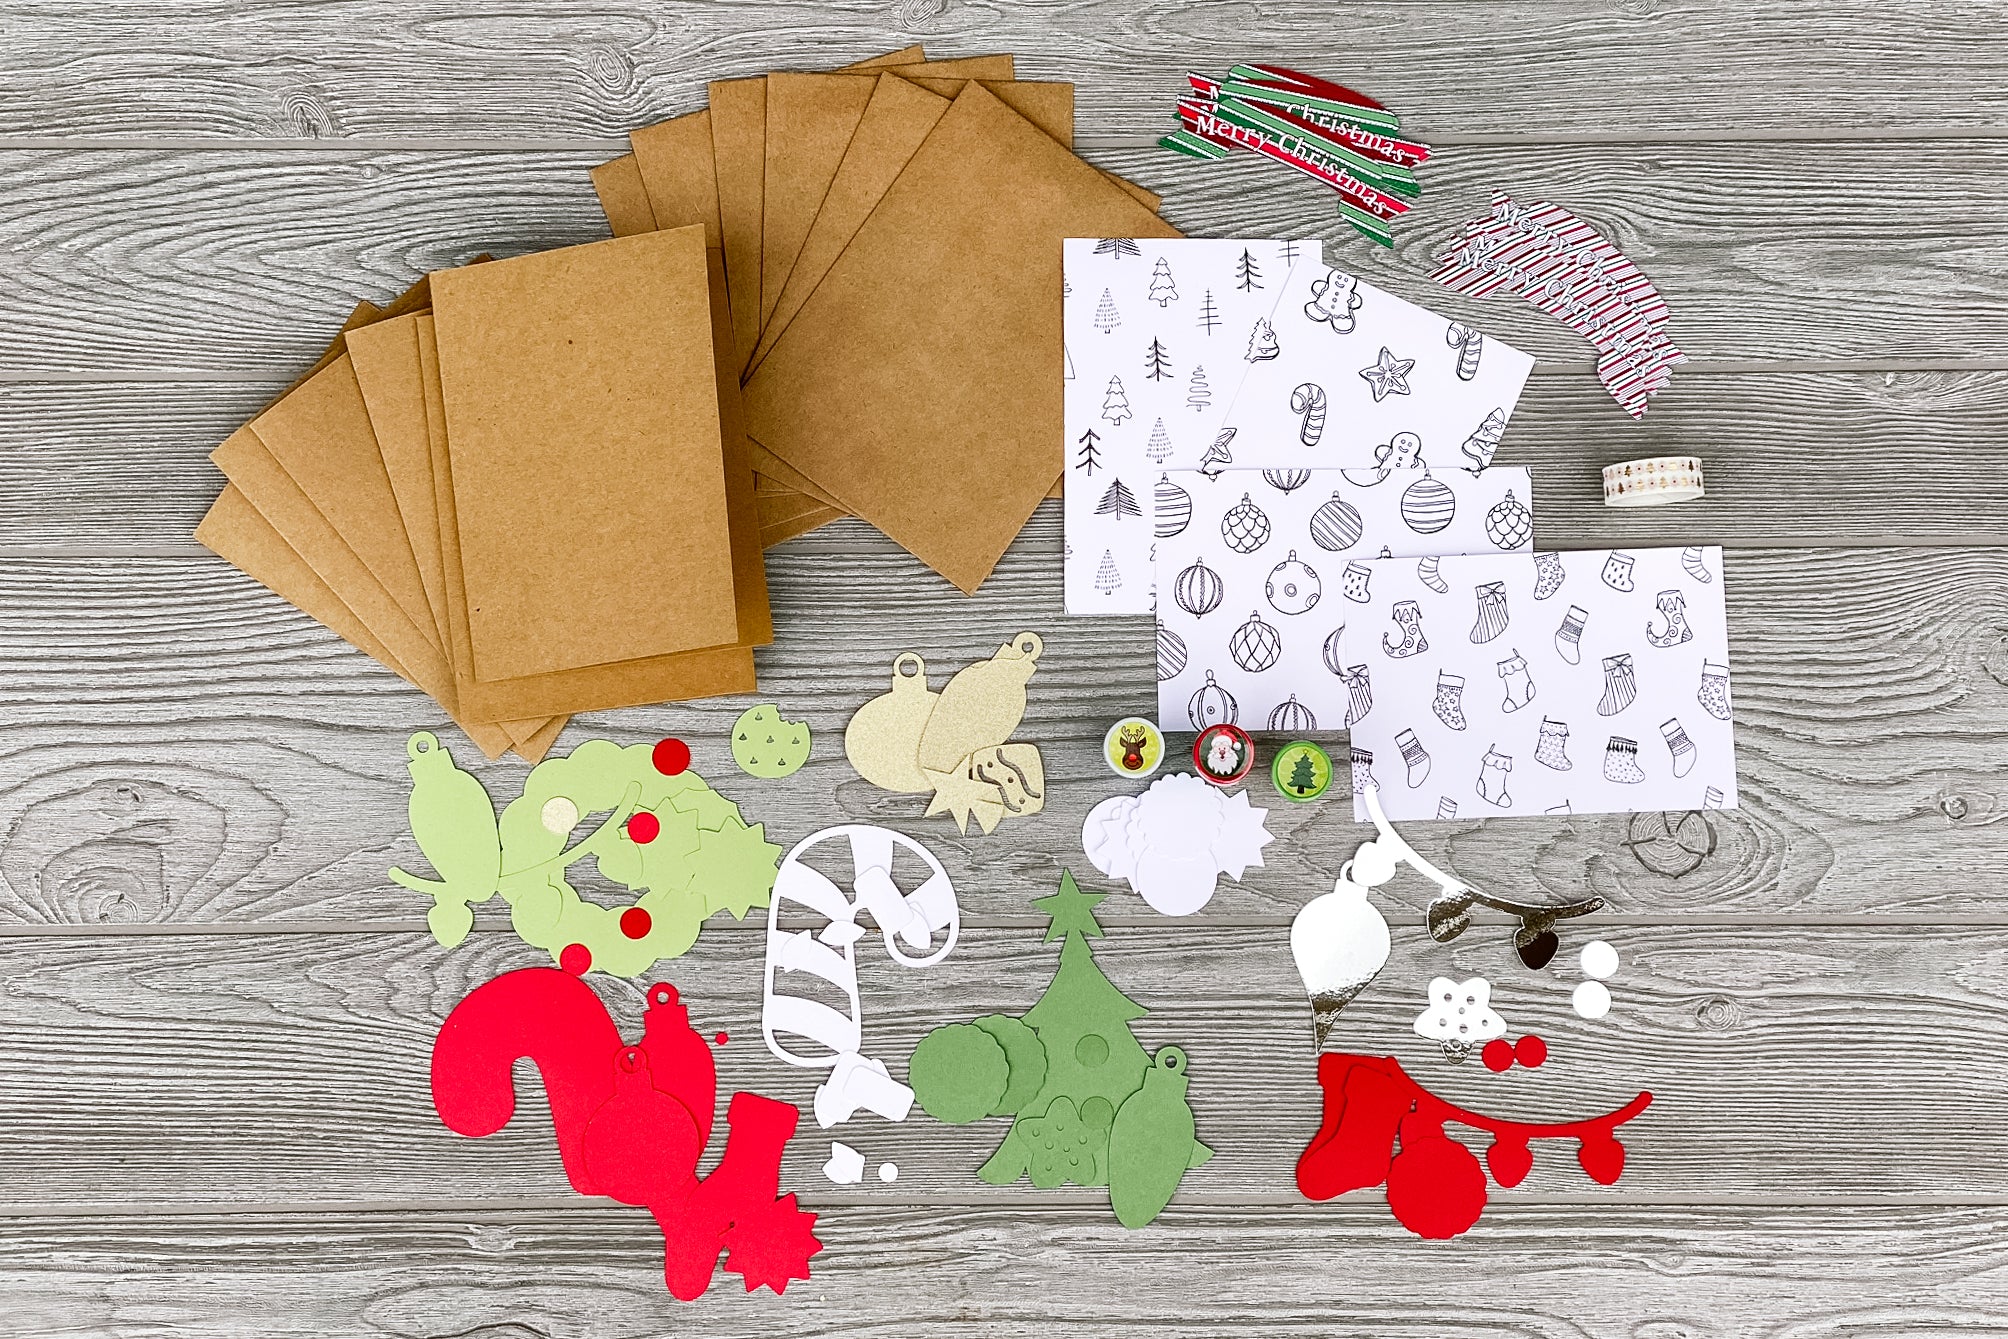 Christmas Craft Kit for Kids, DIY Christmas Cards, Arts and Crafts Set –  Party Your World